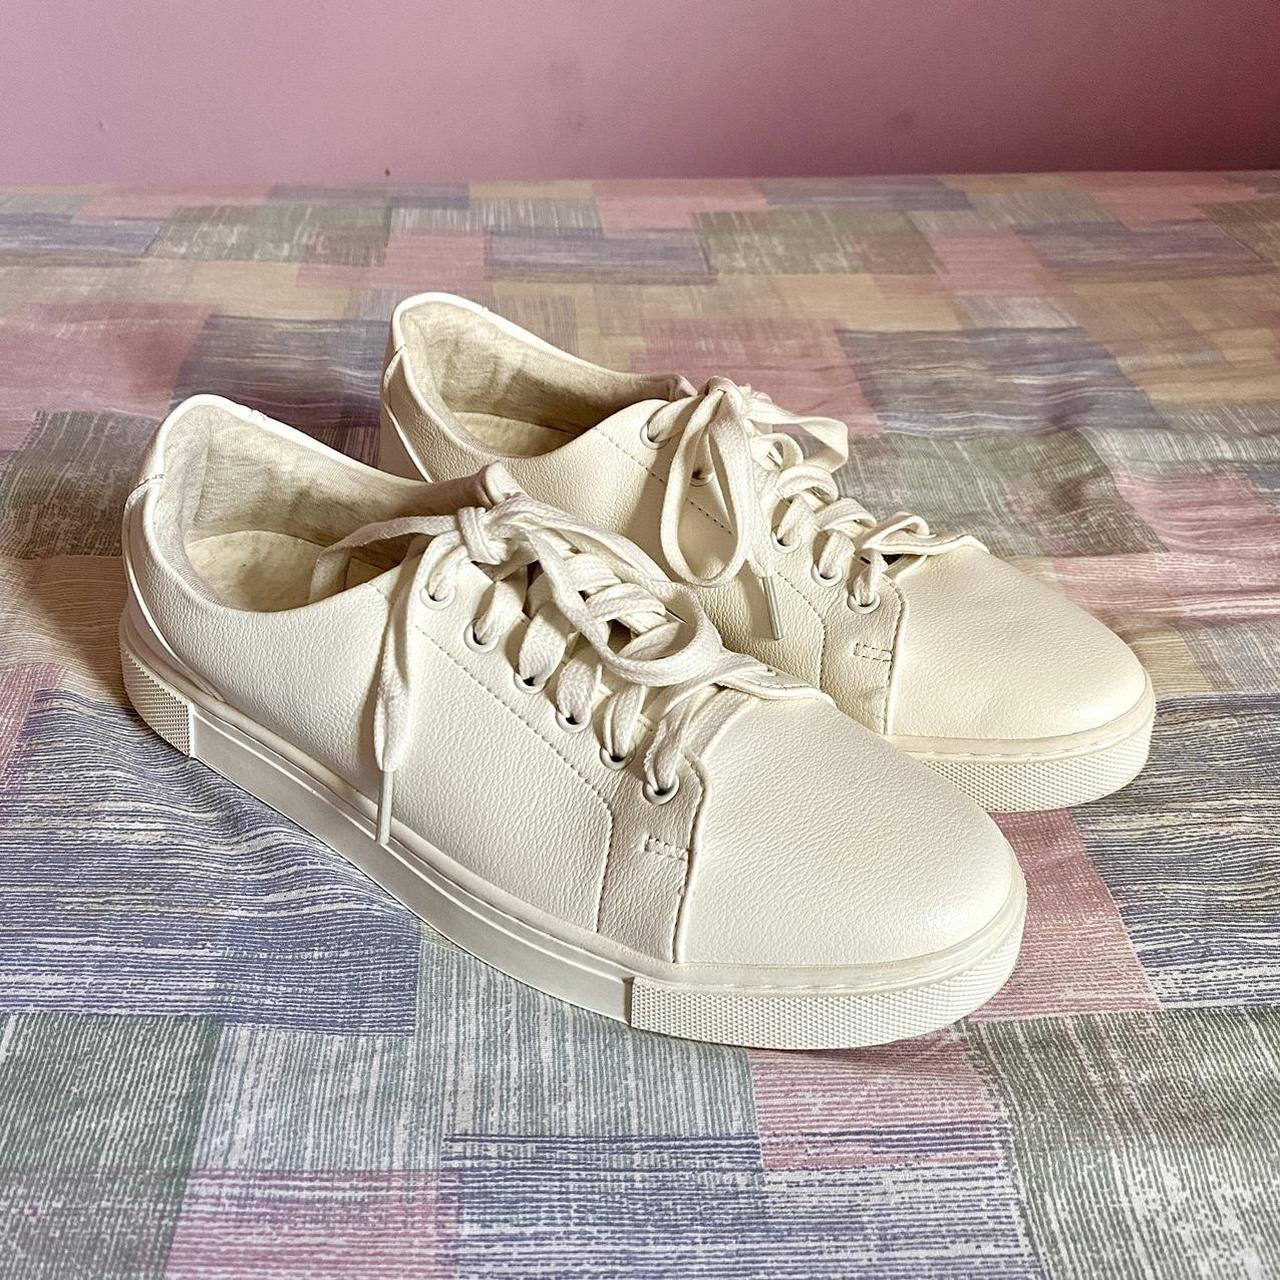 OFF-WHITE KIDS sneakers Offwhite for girls | NICKIS.com